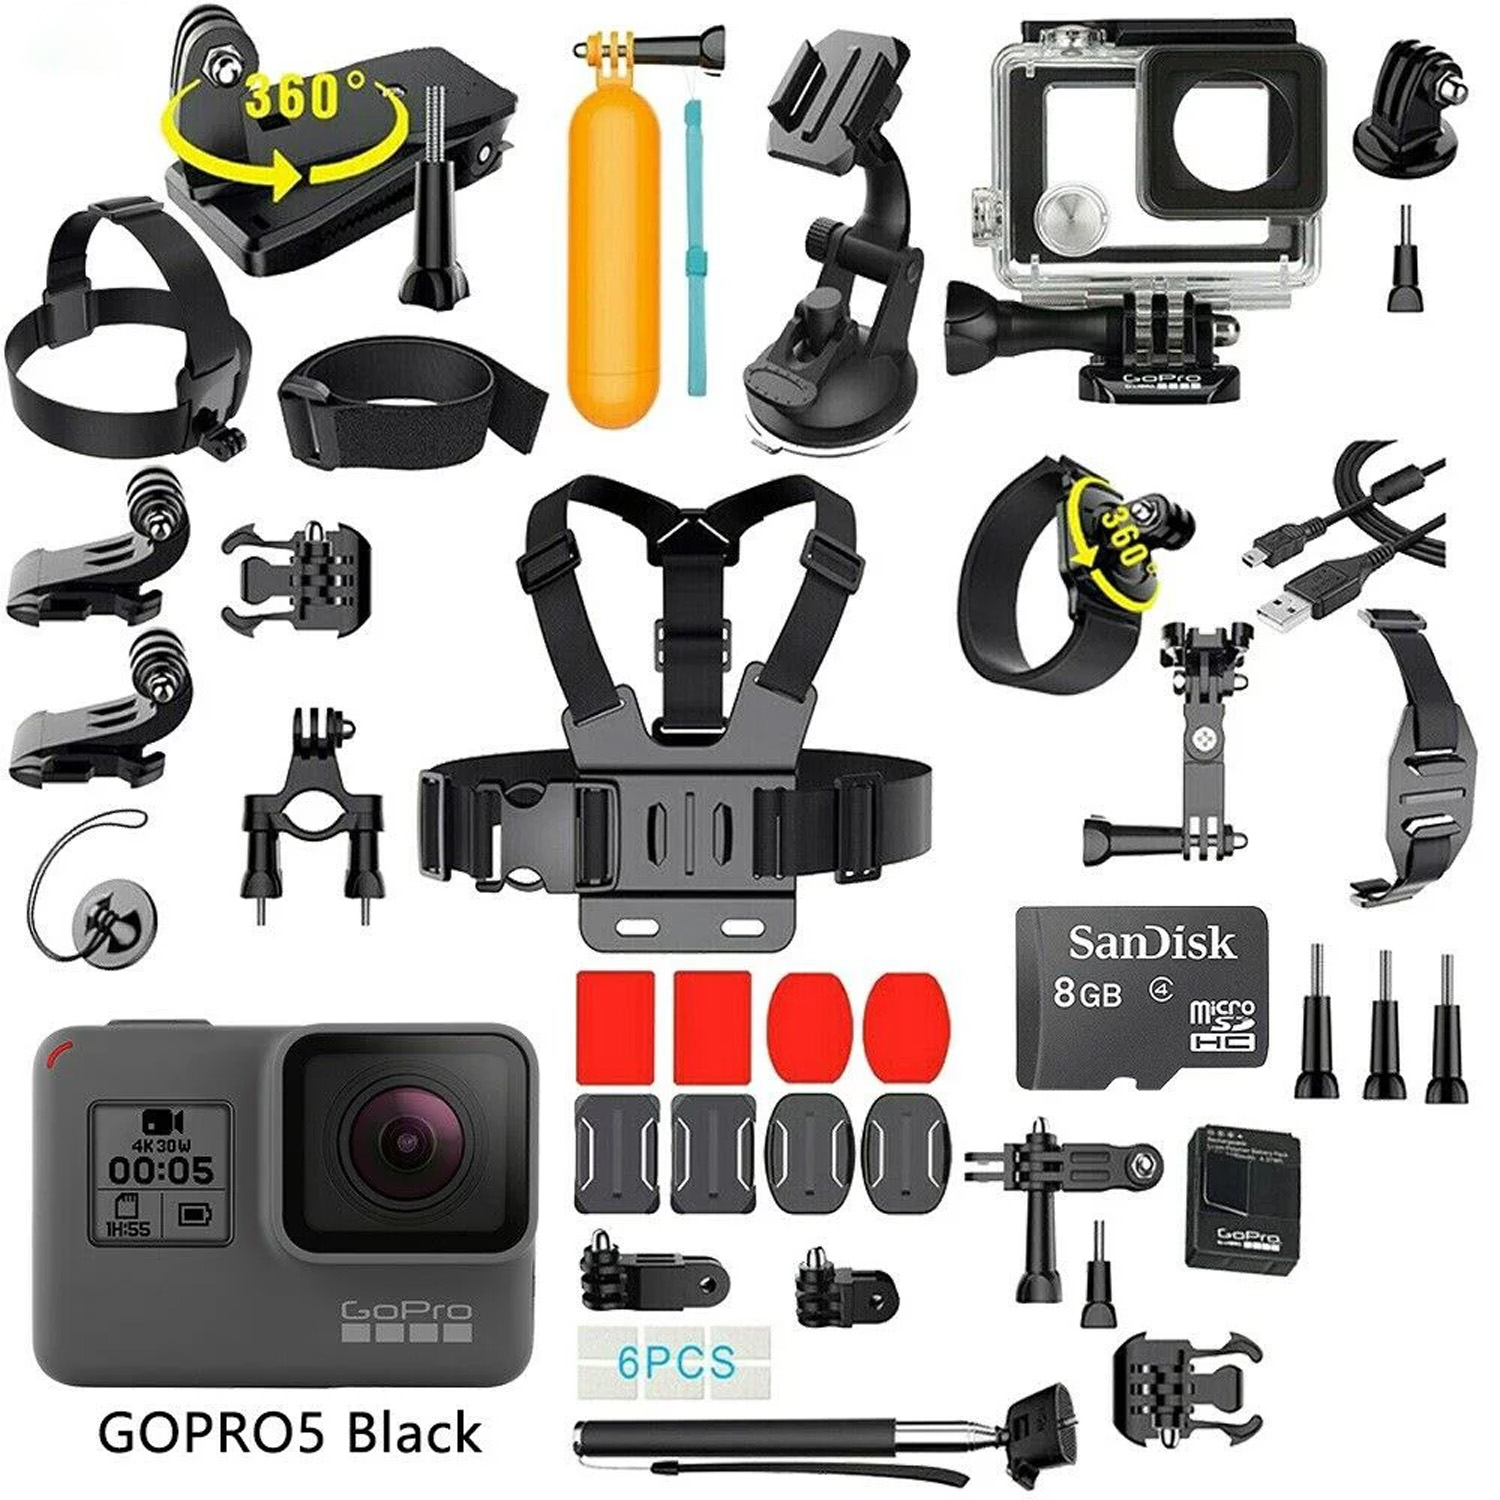 Restored GoPro HERO 5 Black Edition 4K Action Sport Camera CHDHX501 With 35in1 GoPro Action Camera Accessories Kit ECommerce Package (Refurbished) - image 1 of 6